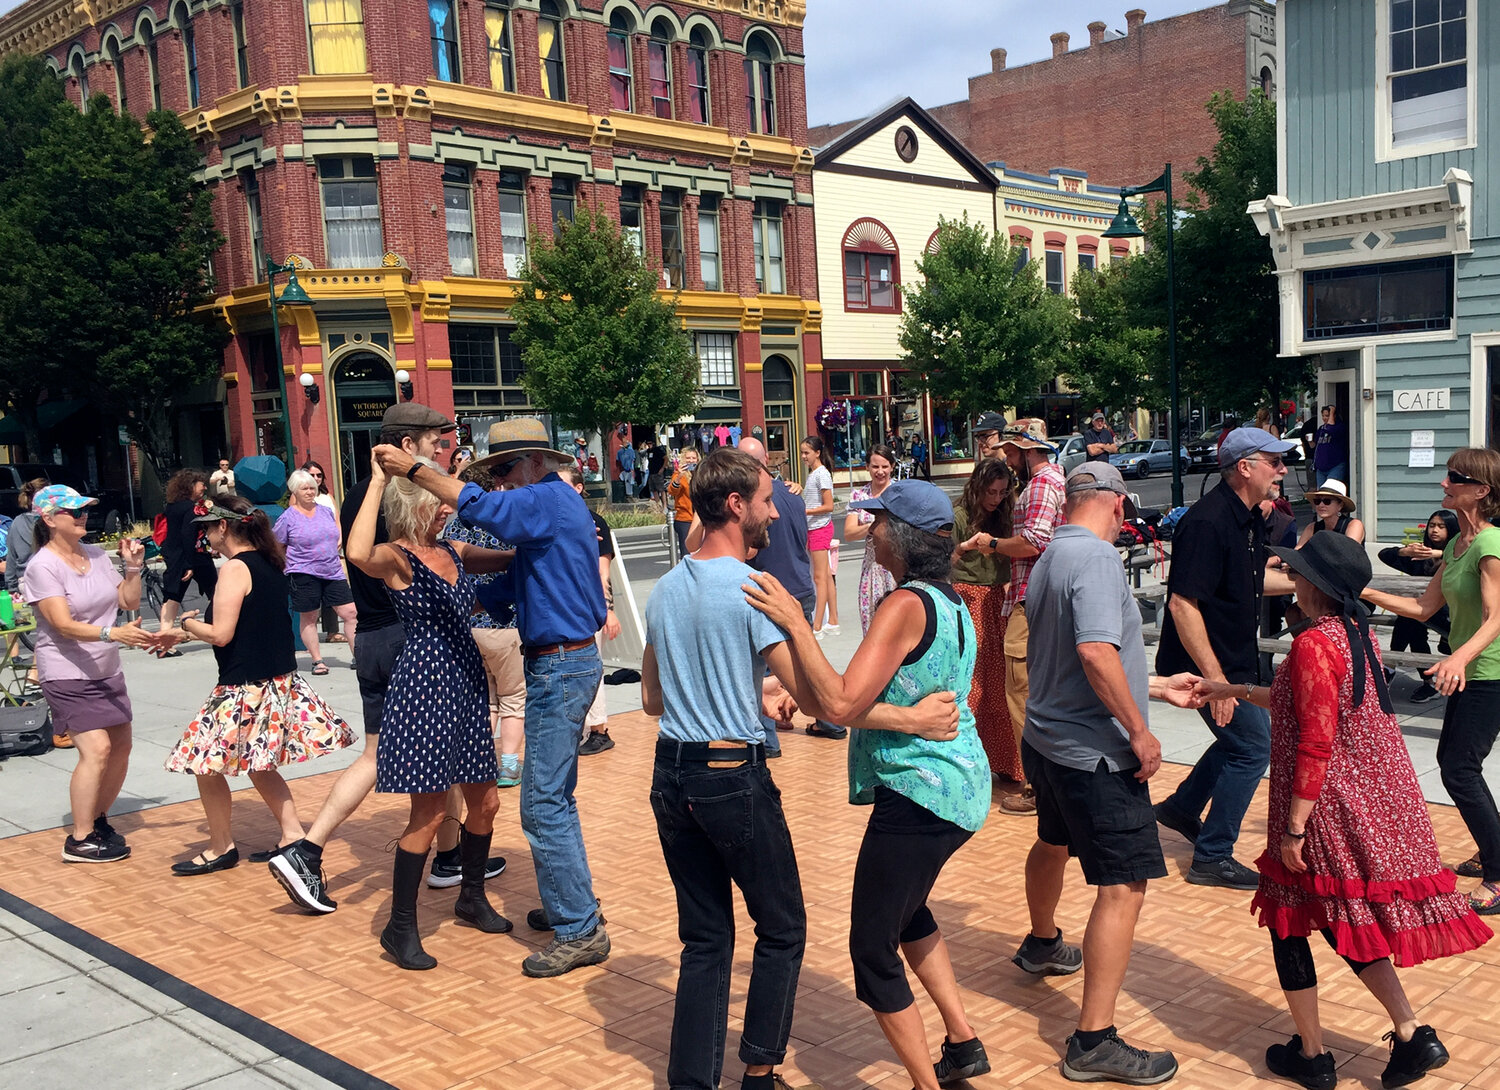 The Lindy Hop Dance class in Tyler Plaza.